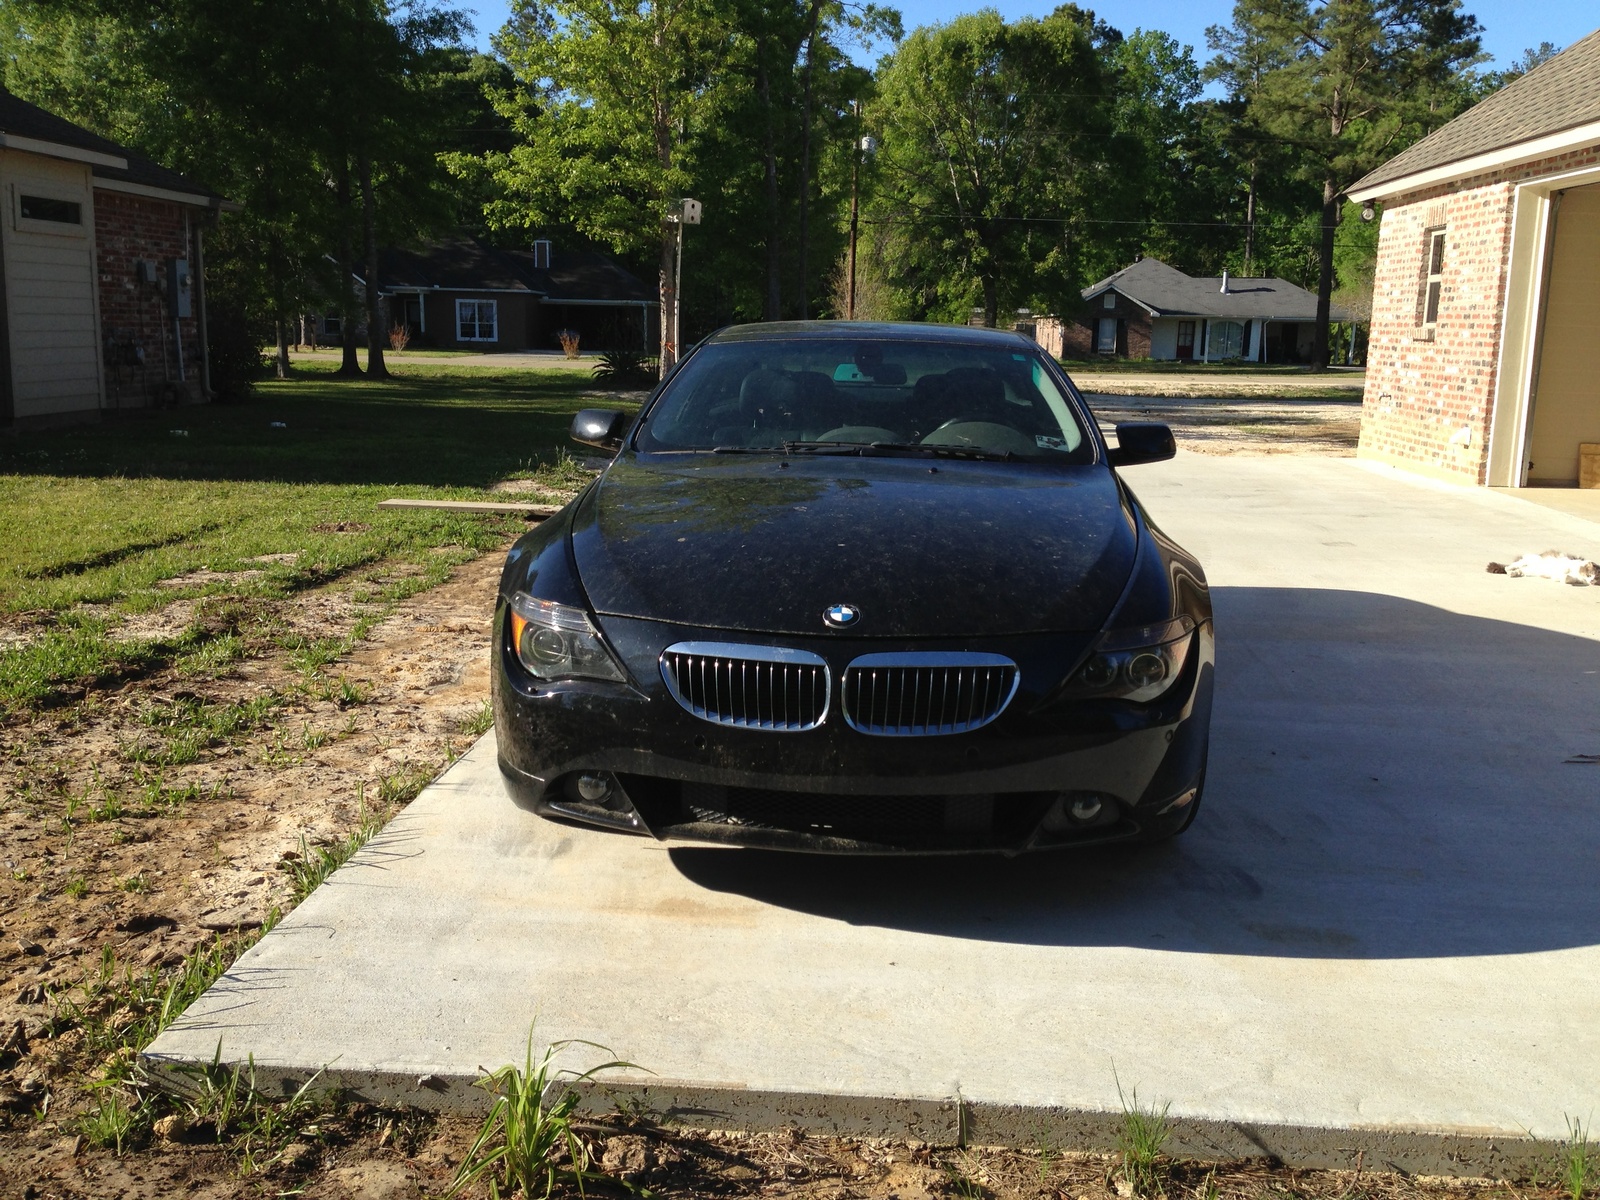 Used bmw cars for sale in louisiana #4